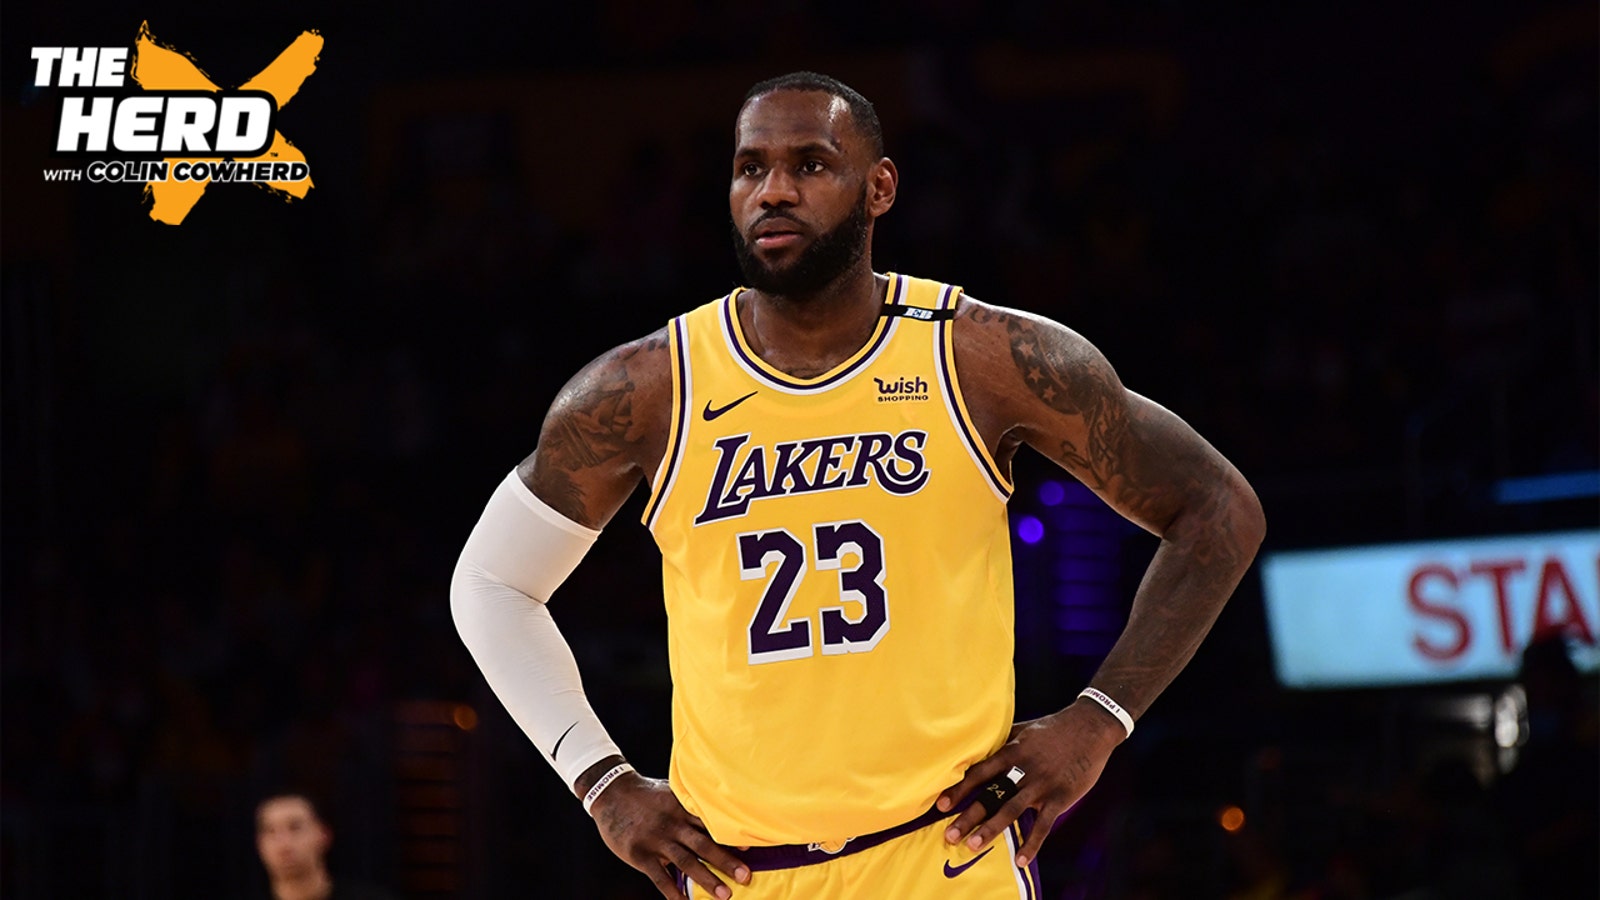 Charles Barkley says he's not putting LeBron James over Michael